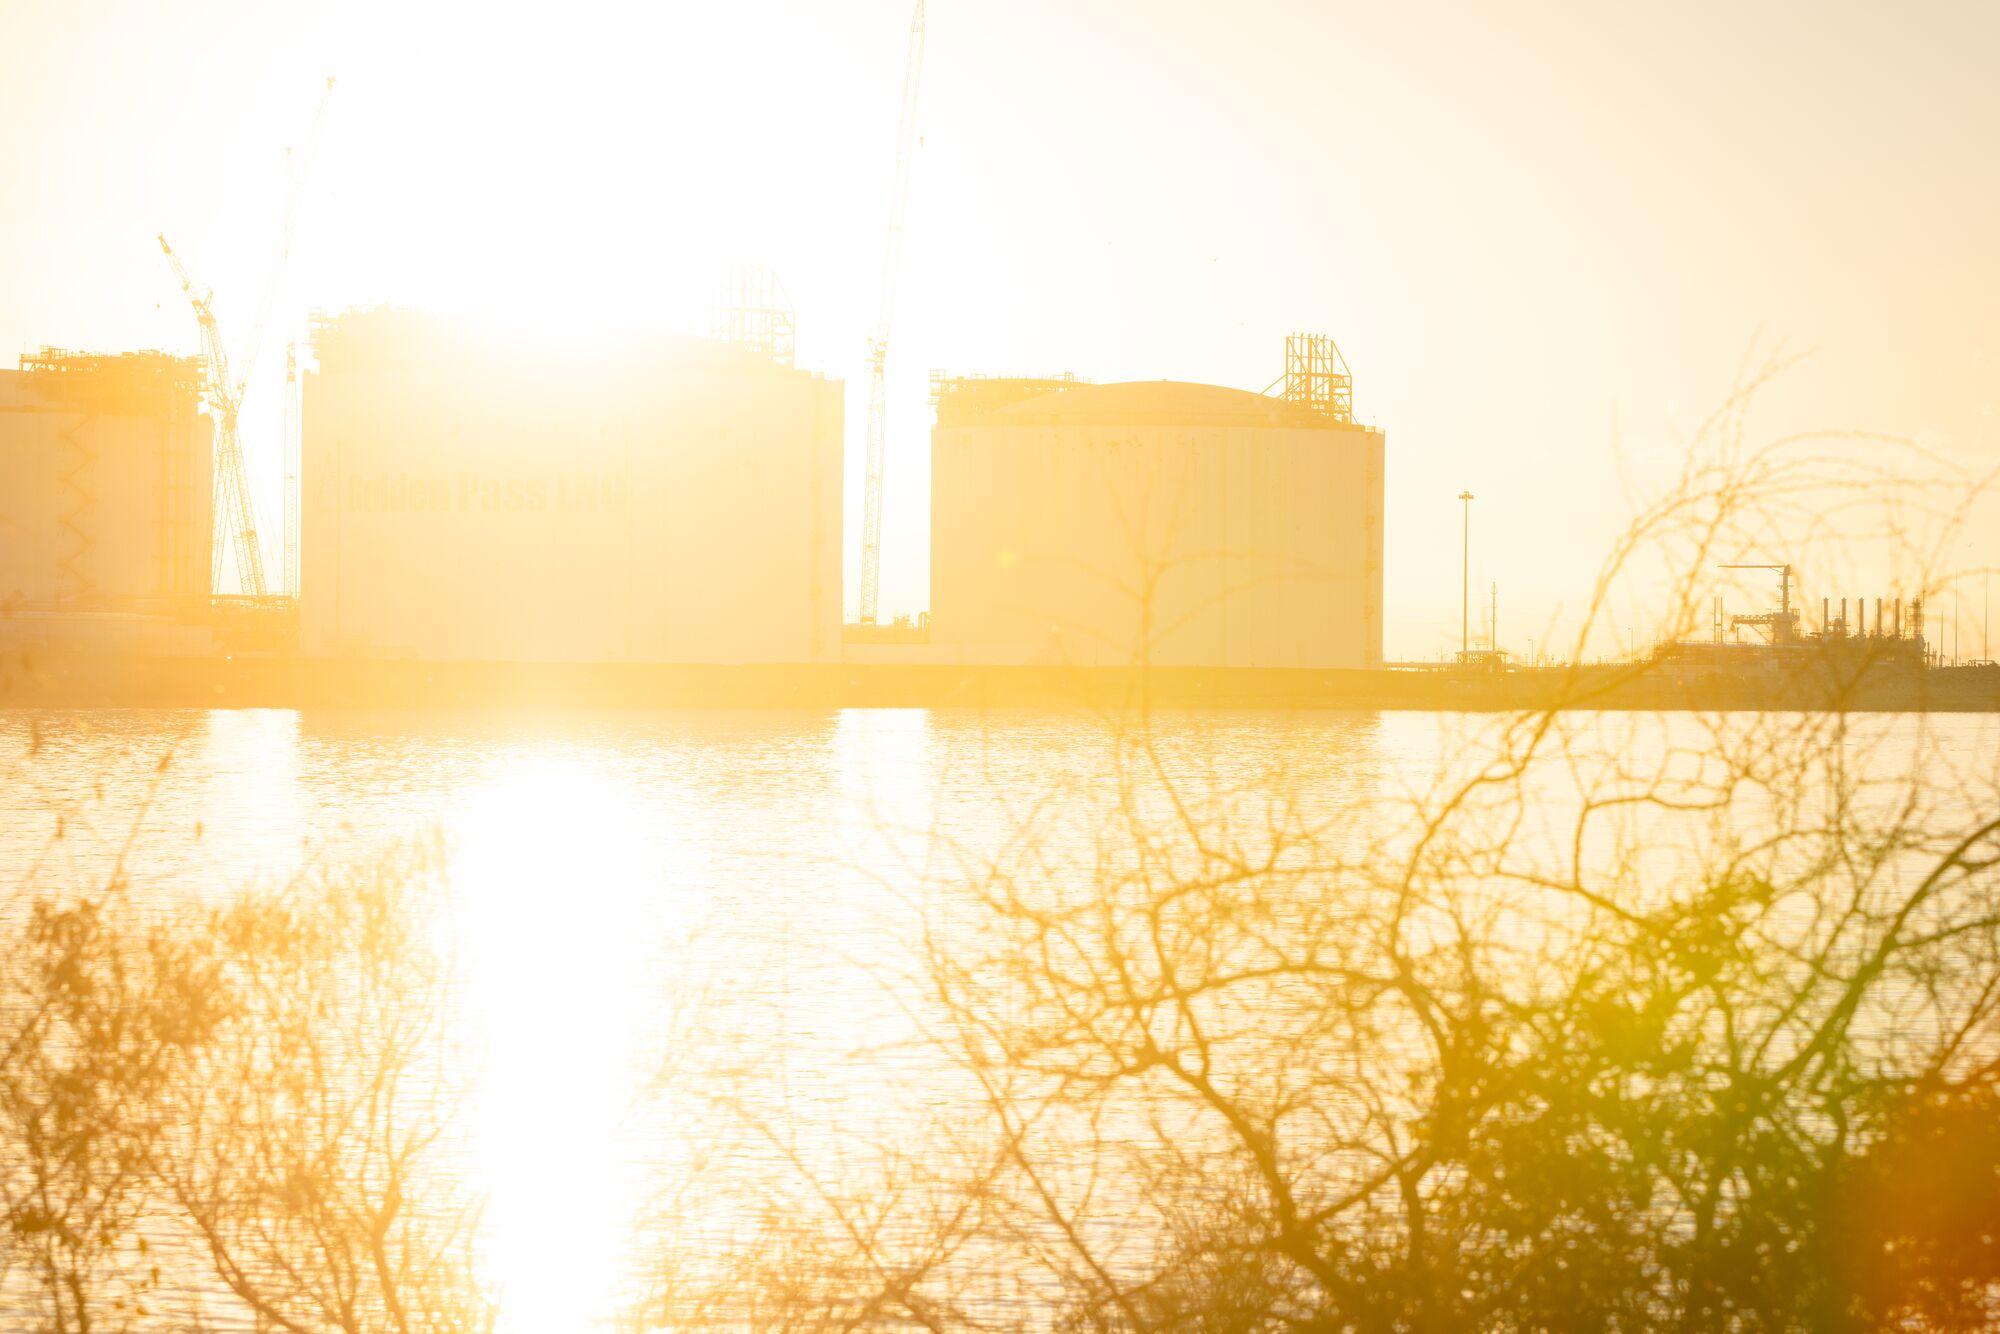 Sunlight streams behind large structures at the Golden Pass LNG Terminal in Port Arthur, TX.